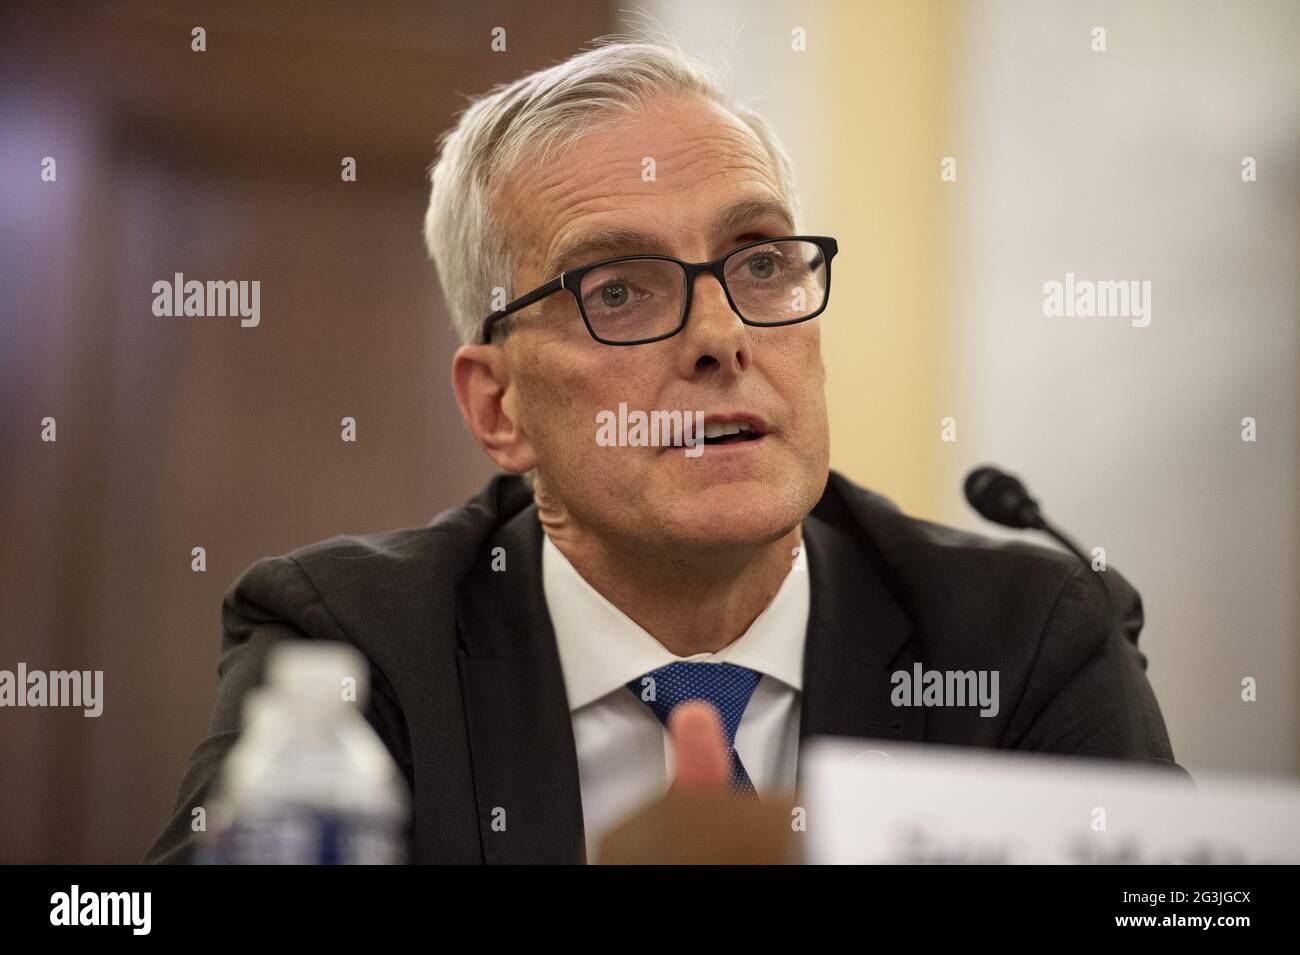 Washington, United States. 16th June, 2021. United States Secretary of Veterans Affairs Denis McDonough speaks during a Senate Committee on Veterans Affairs hearing on the Department of Veteran's Affairs budget for fiscal year 2022 in Washington, DC., on Wednesday, June 16, 2021. Photo by Bonnie Cash/UPI. Credit: UPI/Alamy Live News Stock Photo